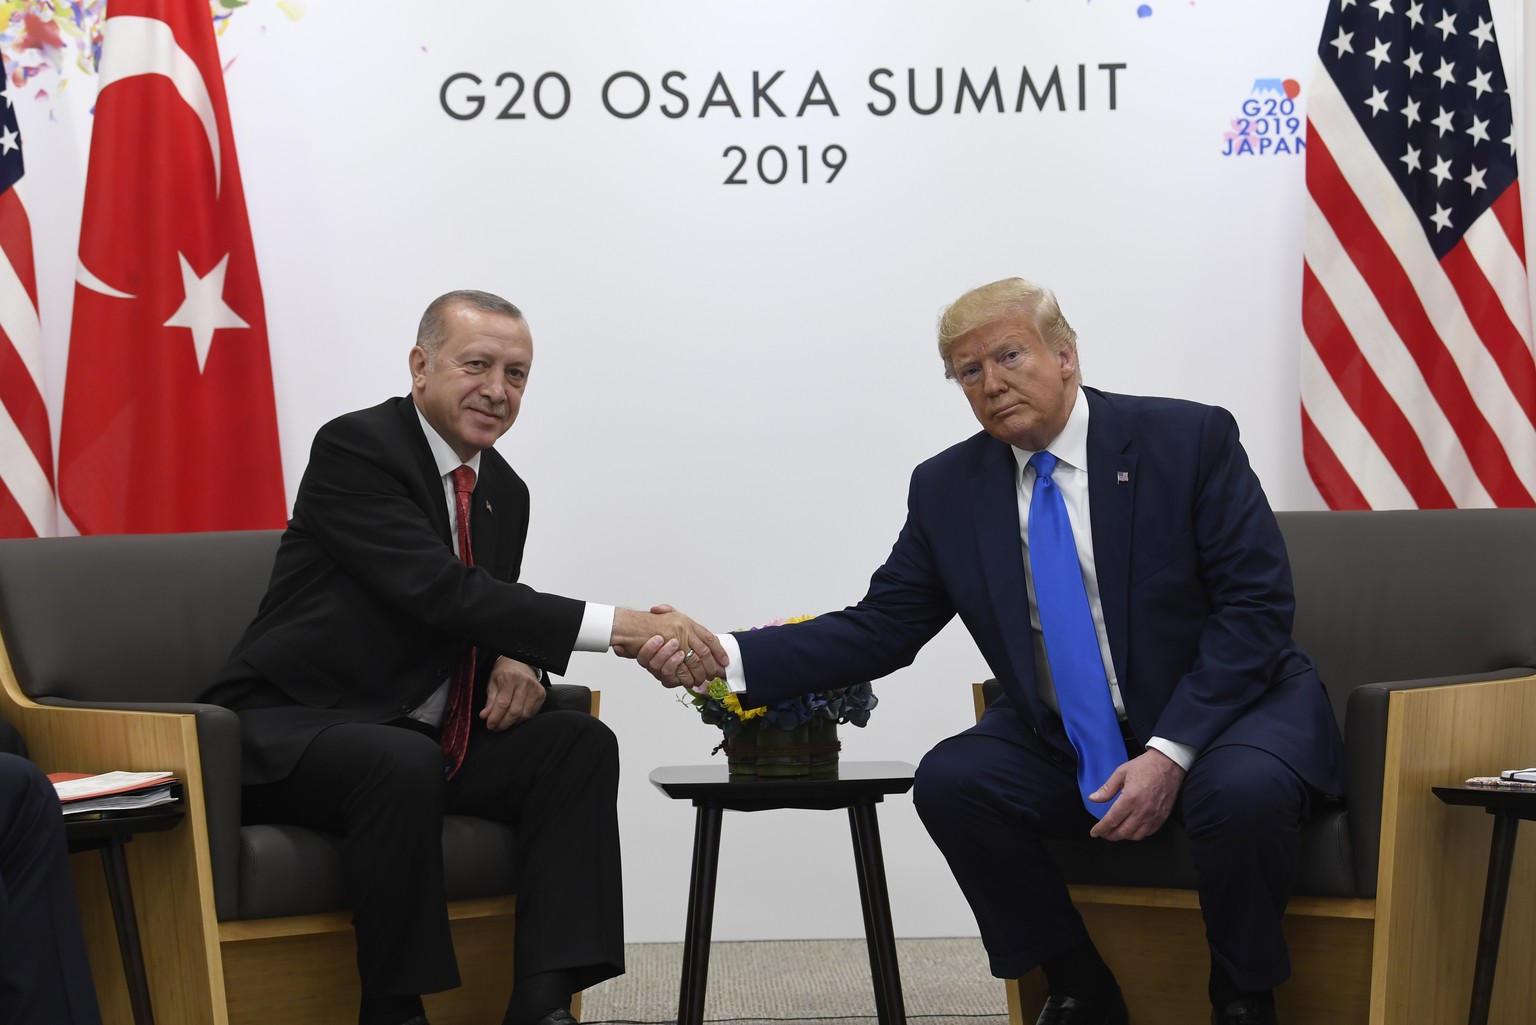 President Donald Trump, right, shakes hands with Turkish President Recep Tayyip Erdogan, left, during a meeting on the sidelines of the G-20 summit in Osaka, Japan, Saturday, June 29, 2019. (AP Photo/ ...